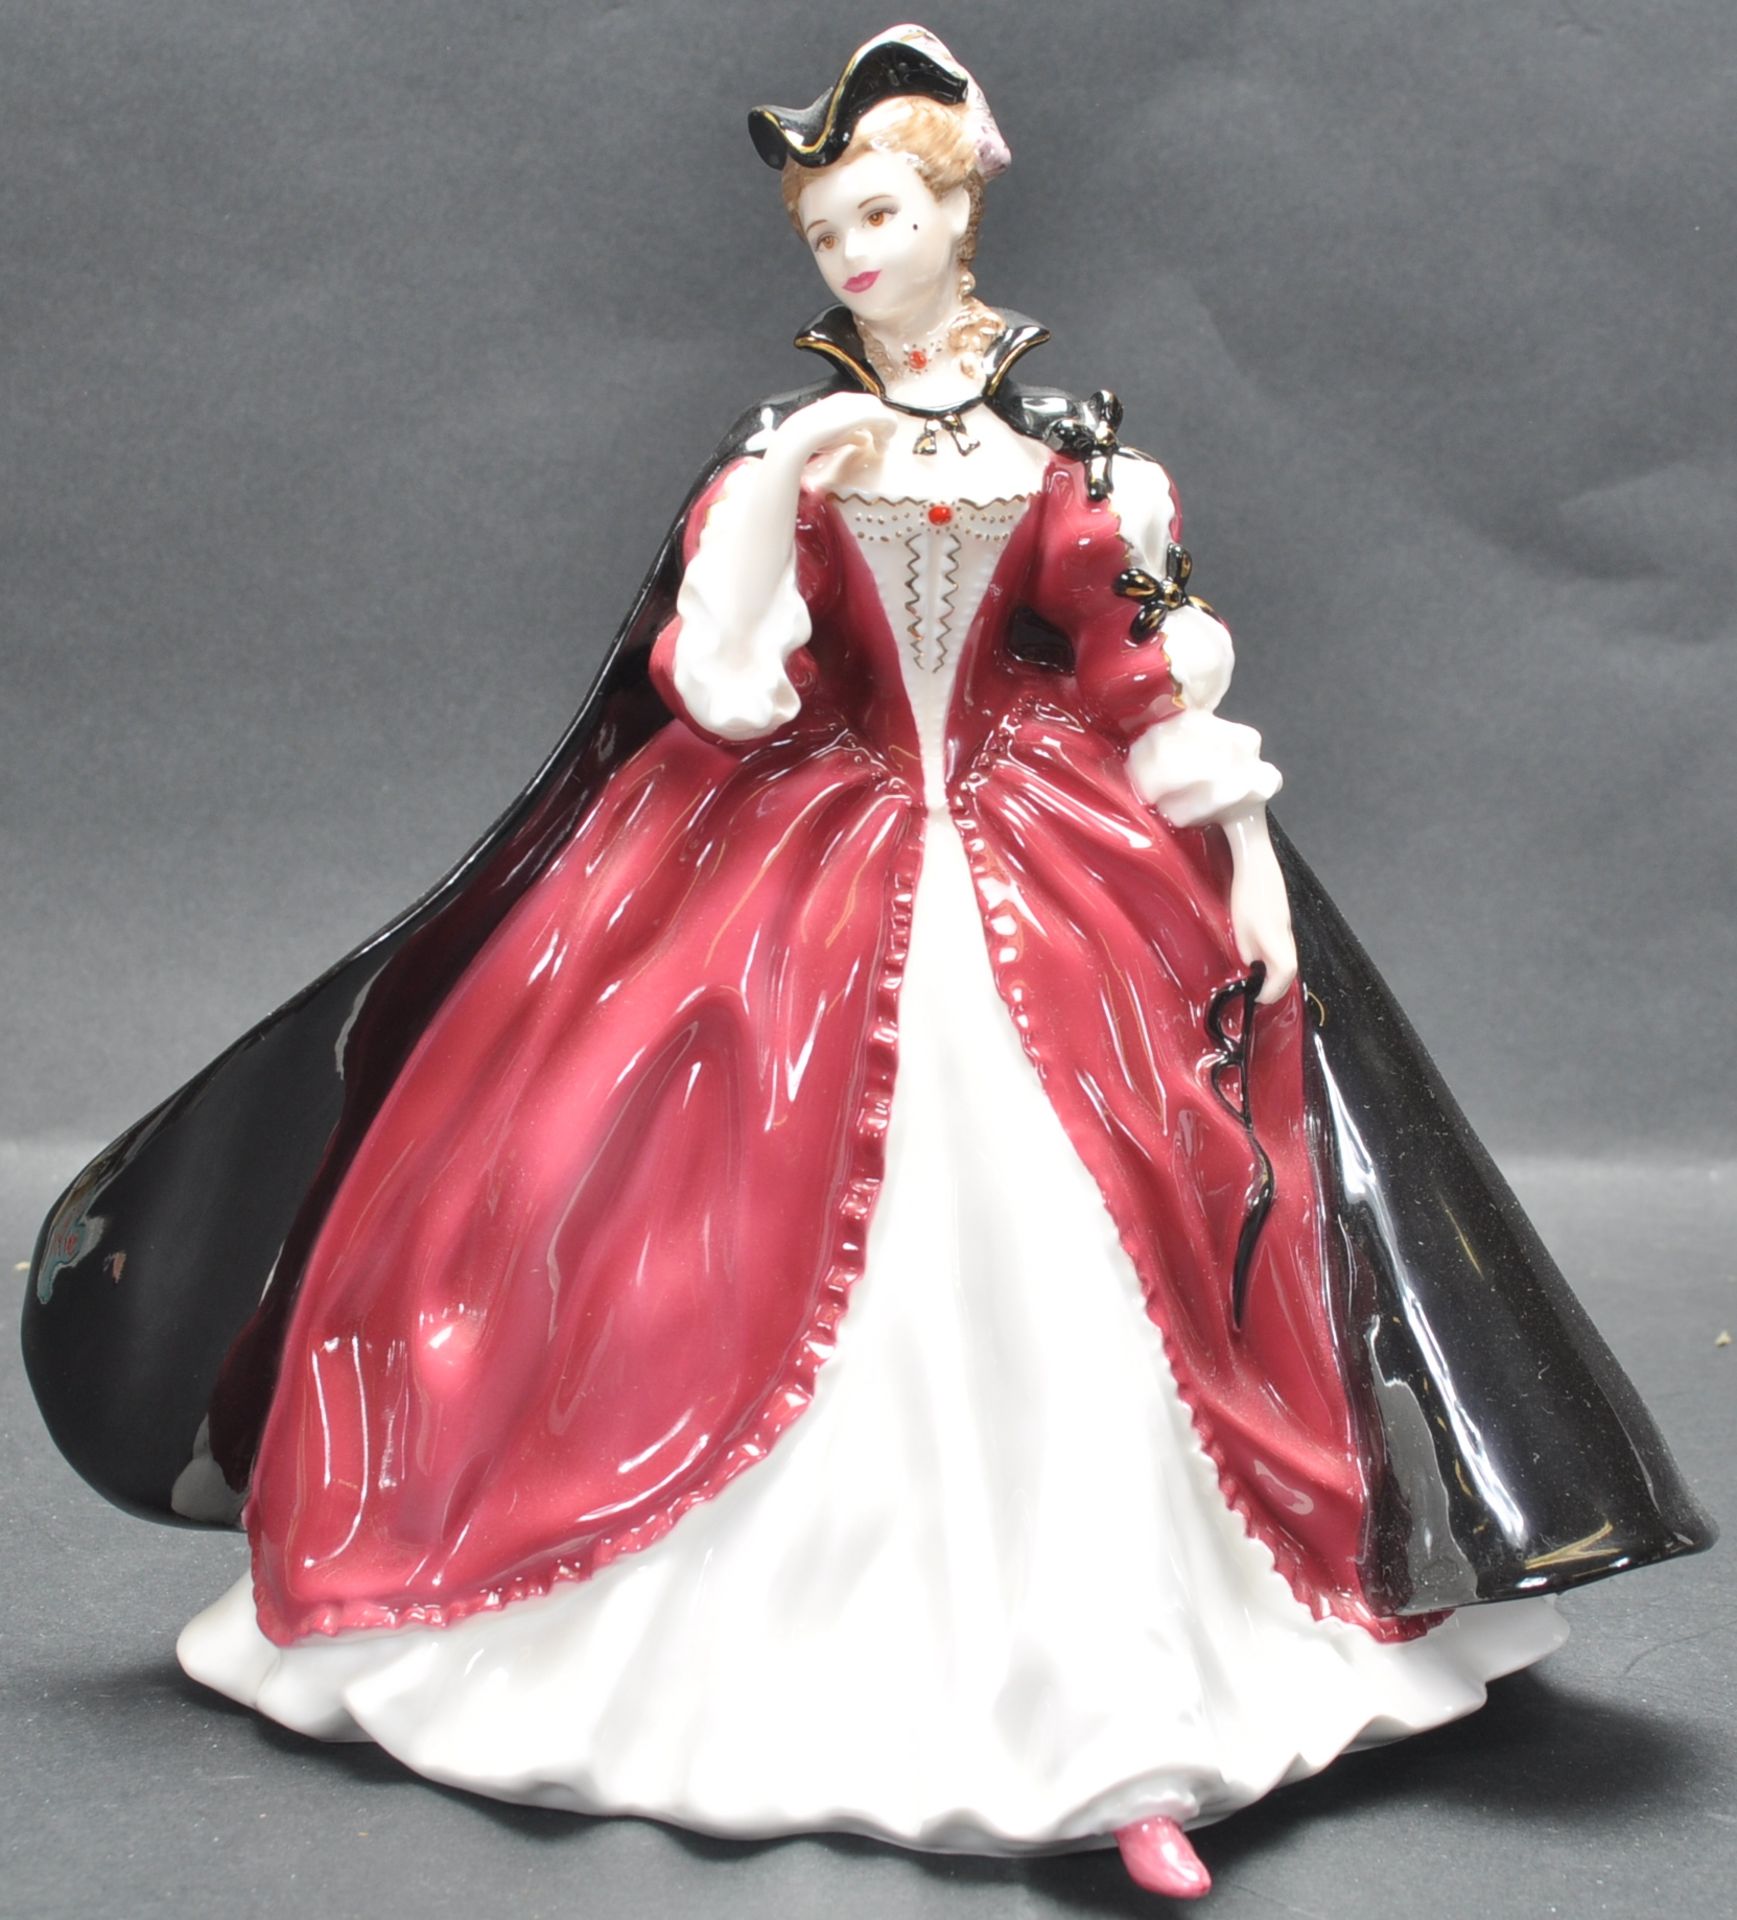 COALPORT LADY FIGURE ENTITLED THE WICKED LADY.